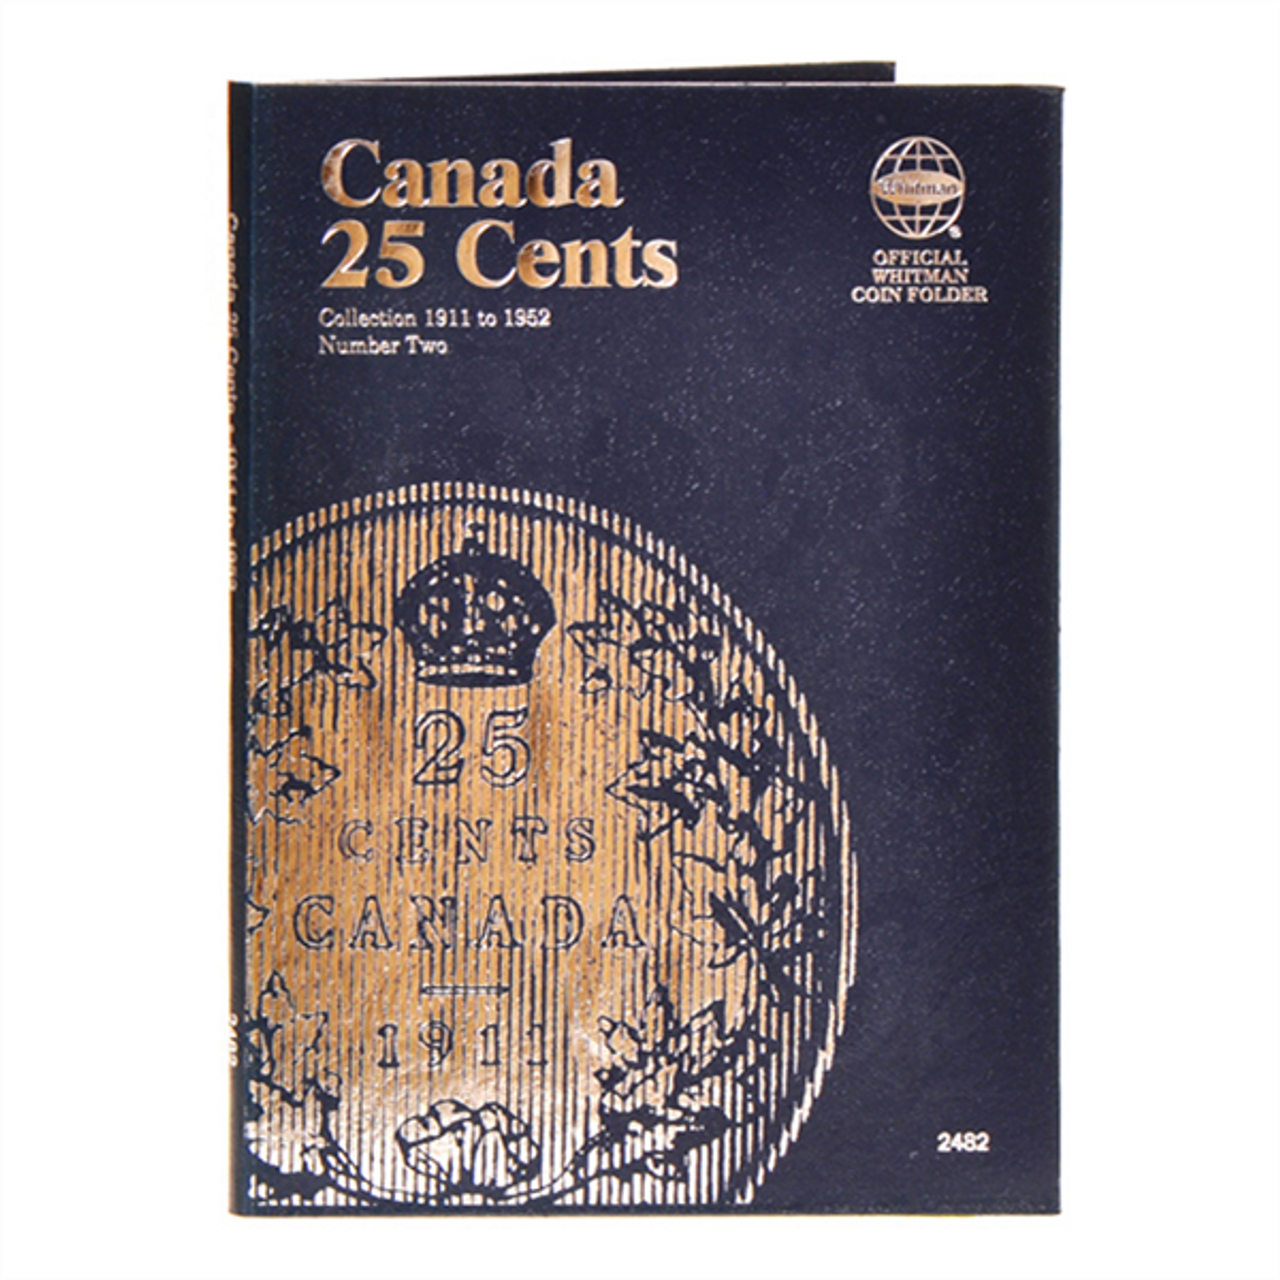 Whitman Coin Folder - Canadian 25 Cents #2 1911-1952